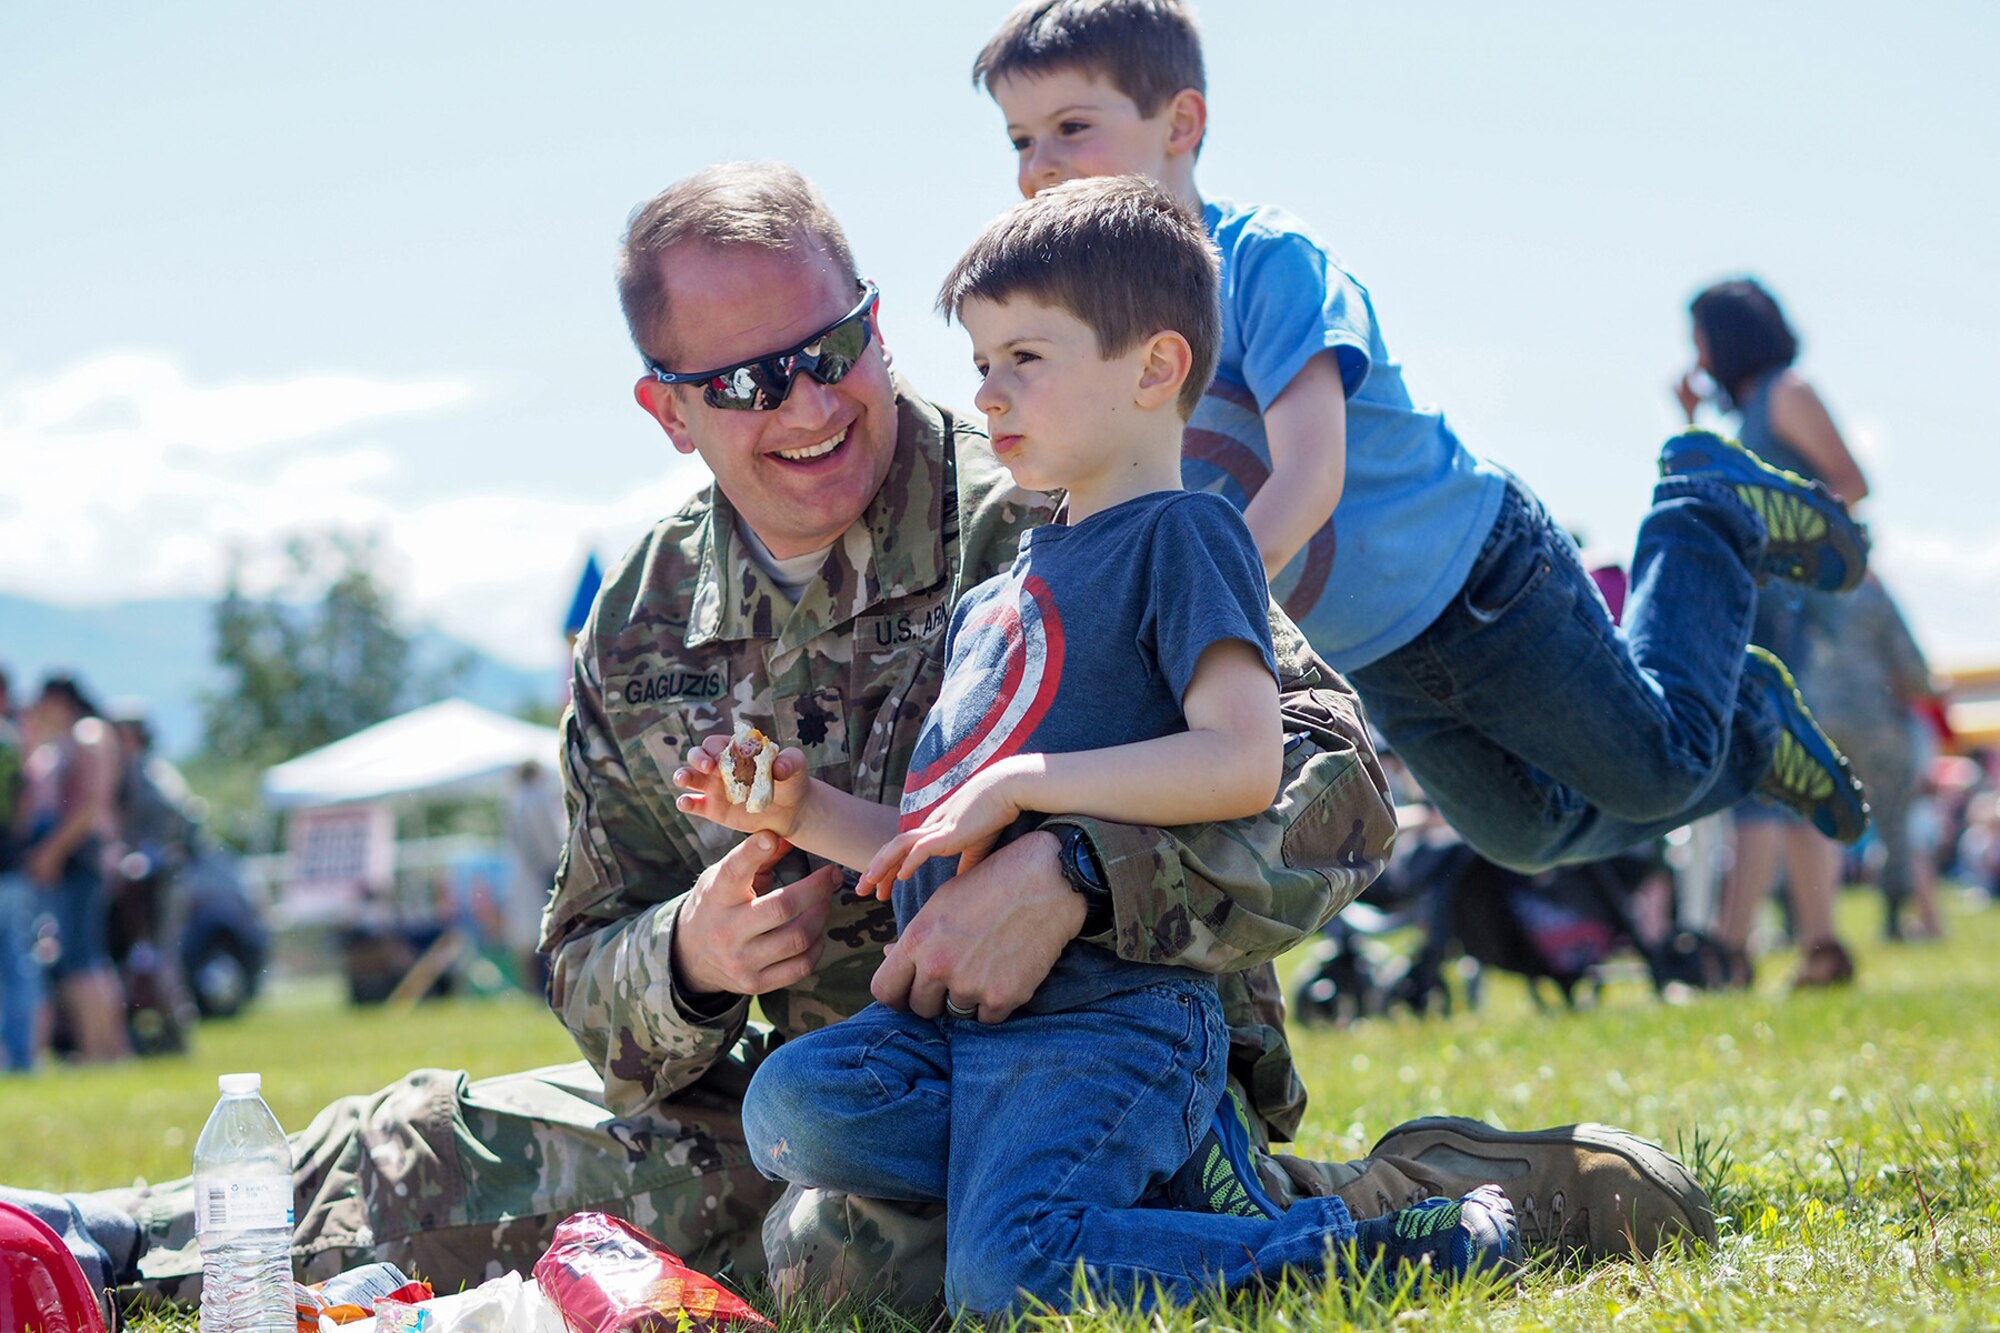 Army Lt. Col. Marc Gaguzis, assigned to Headquarters and Headquarters Detachment, U.S. Army Alaska, holds his son Alex, 4, as his other son Jacob, 4, jumps on his back while service members, dependents, and Department of Defense civilians attend the Military Appreciation Week picnic at the Joint Base Elmendorf-Richardson, Alaska, Buckner Fitness Center fields June 16, 2017. Several organizations came together to provide a variety of family-fun activities such as competitive sporting events for the adults, face painting and bouncy houses for the children in addition to the Anchorage Chamber of Commerce-provided food and music during the annual event.